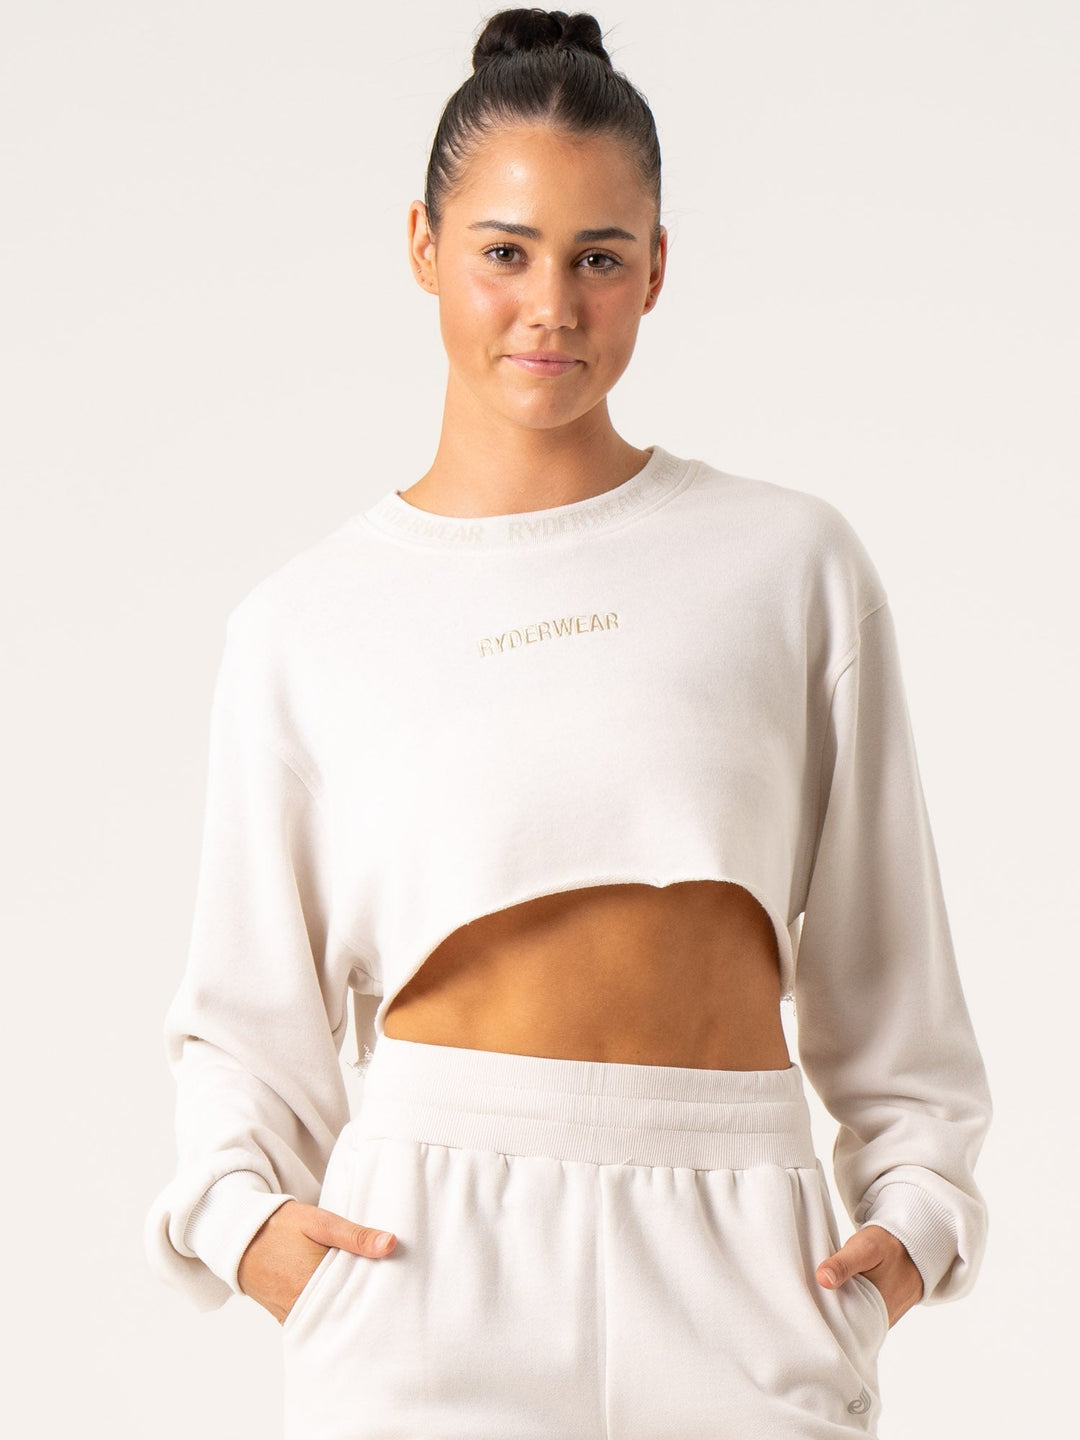 Cropped Sweater - Oat Clothing Ryderwear 